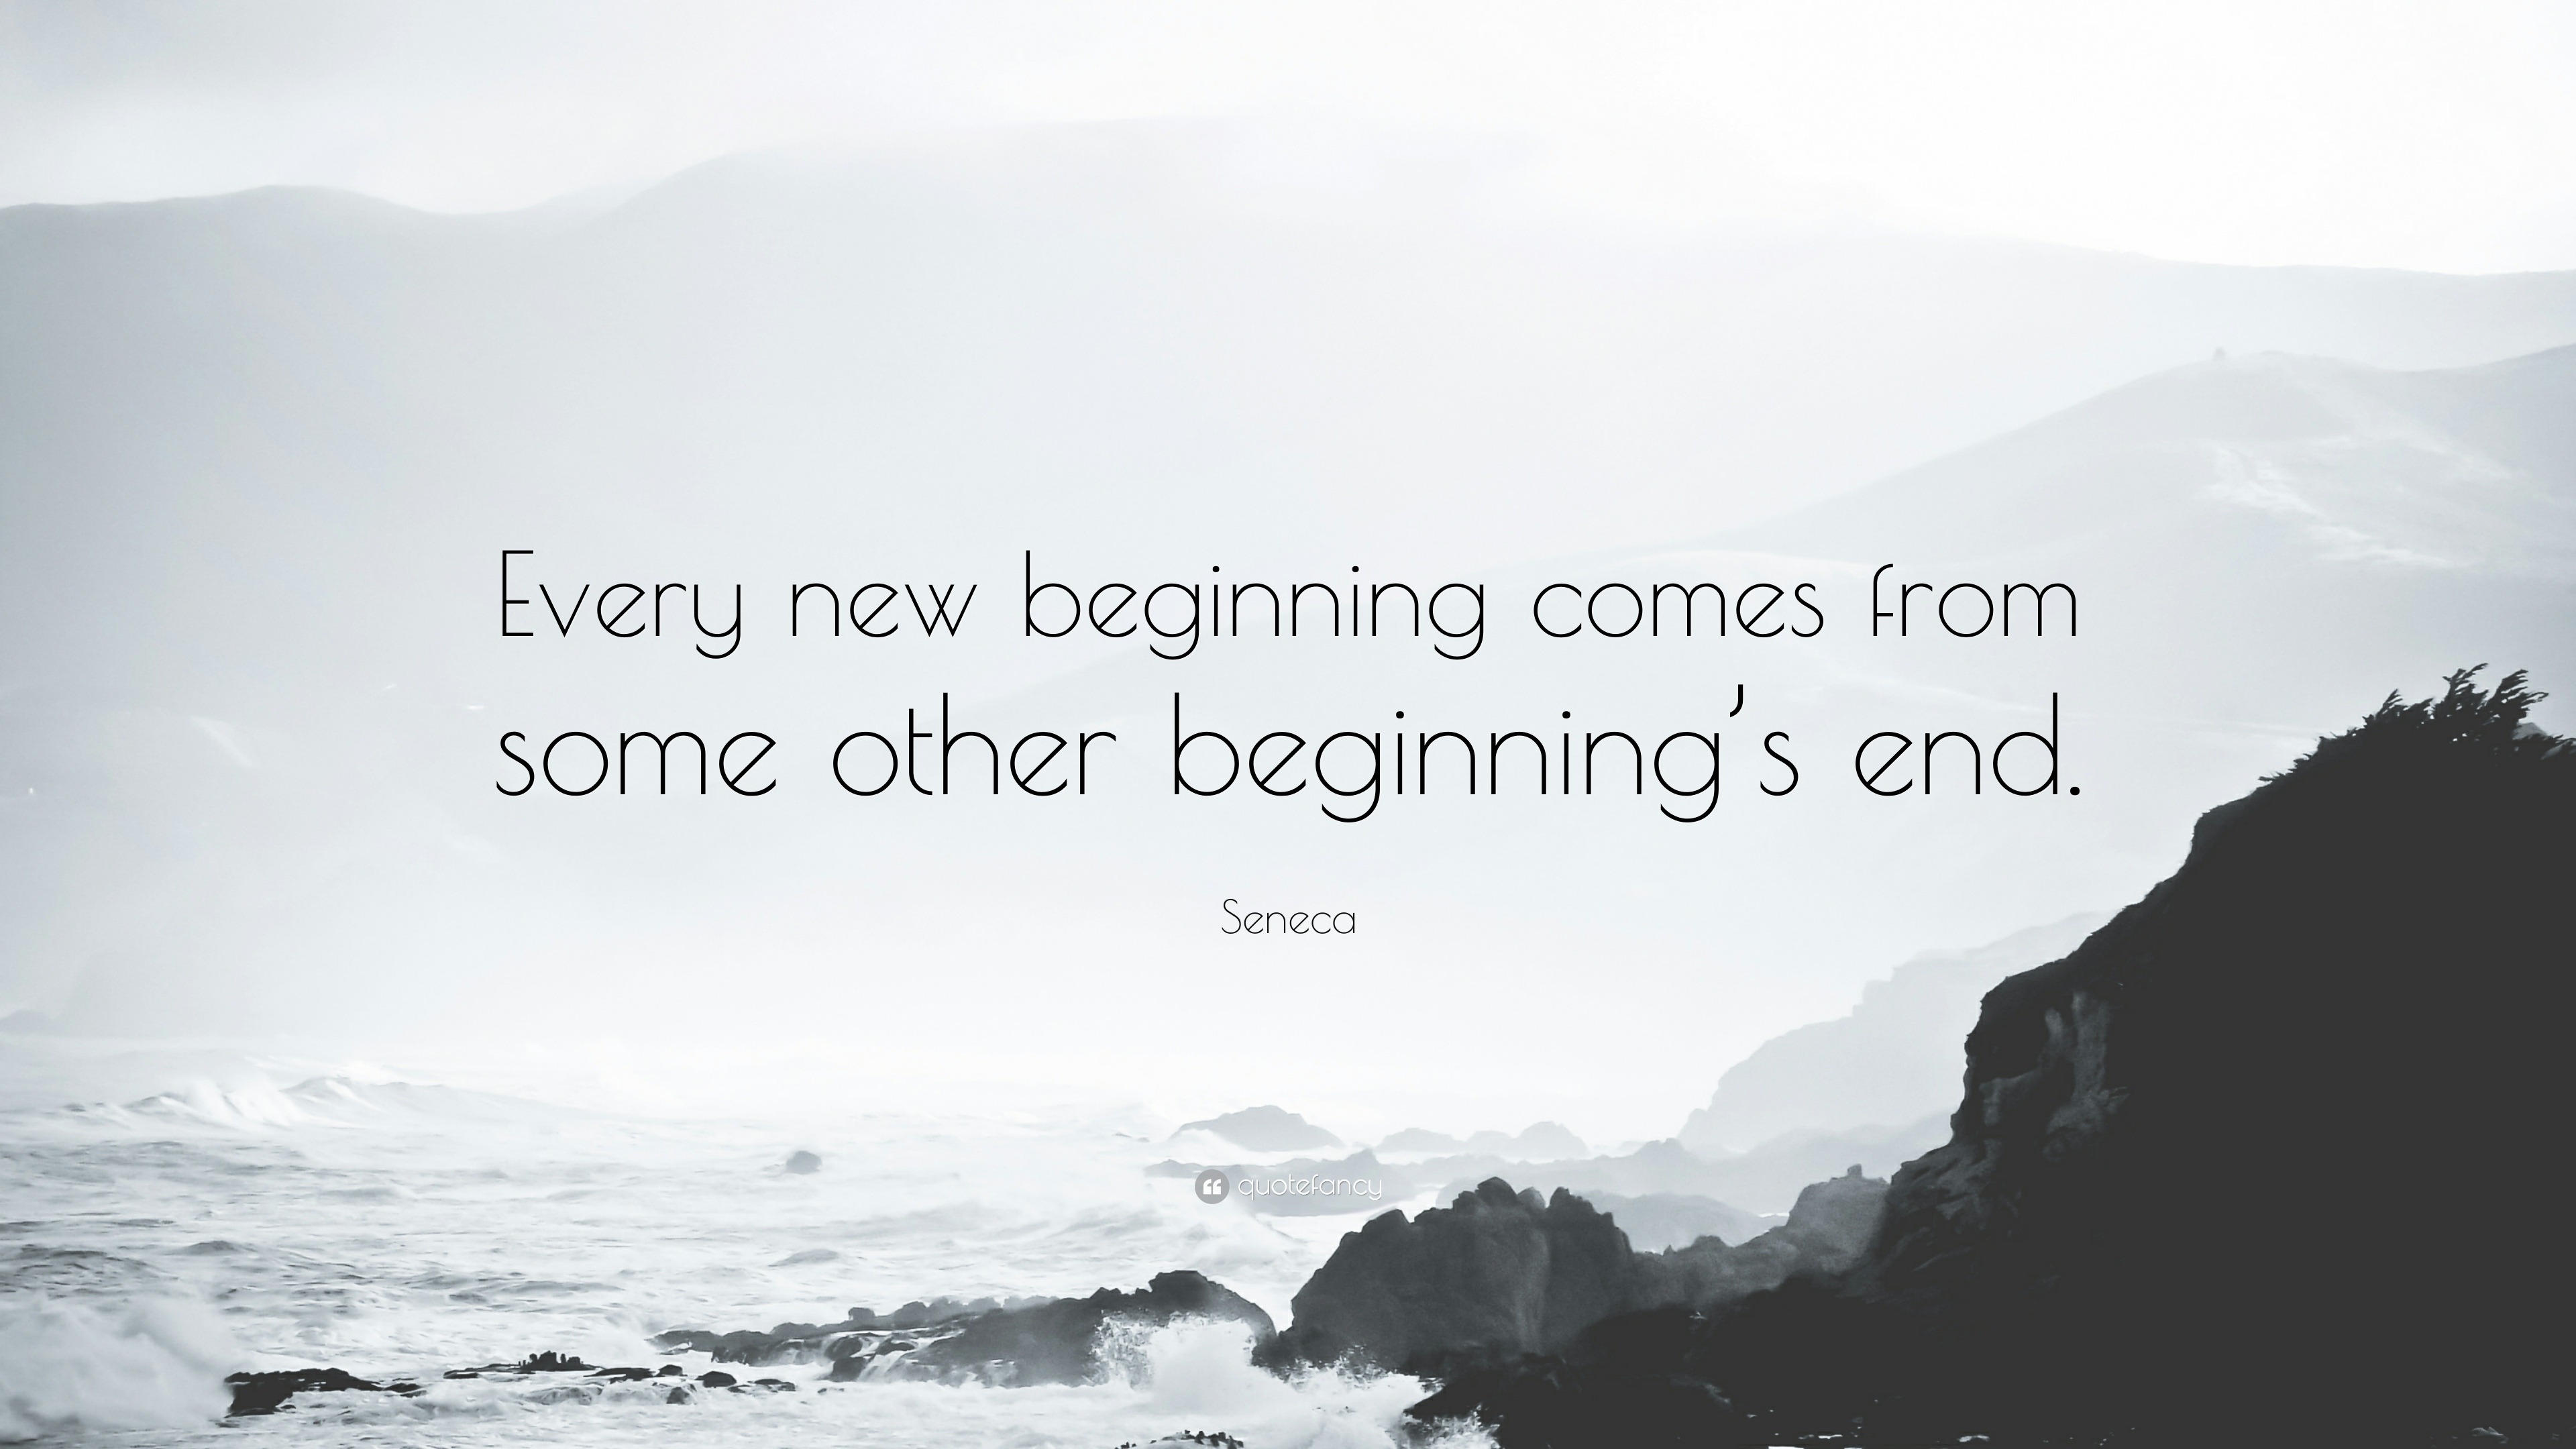 famous quotes about endings and new beginnings